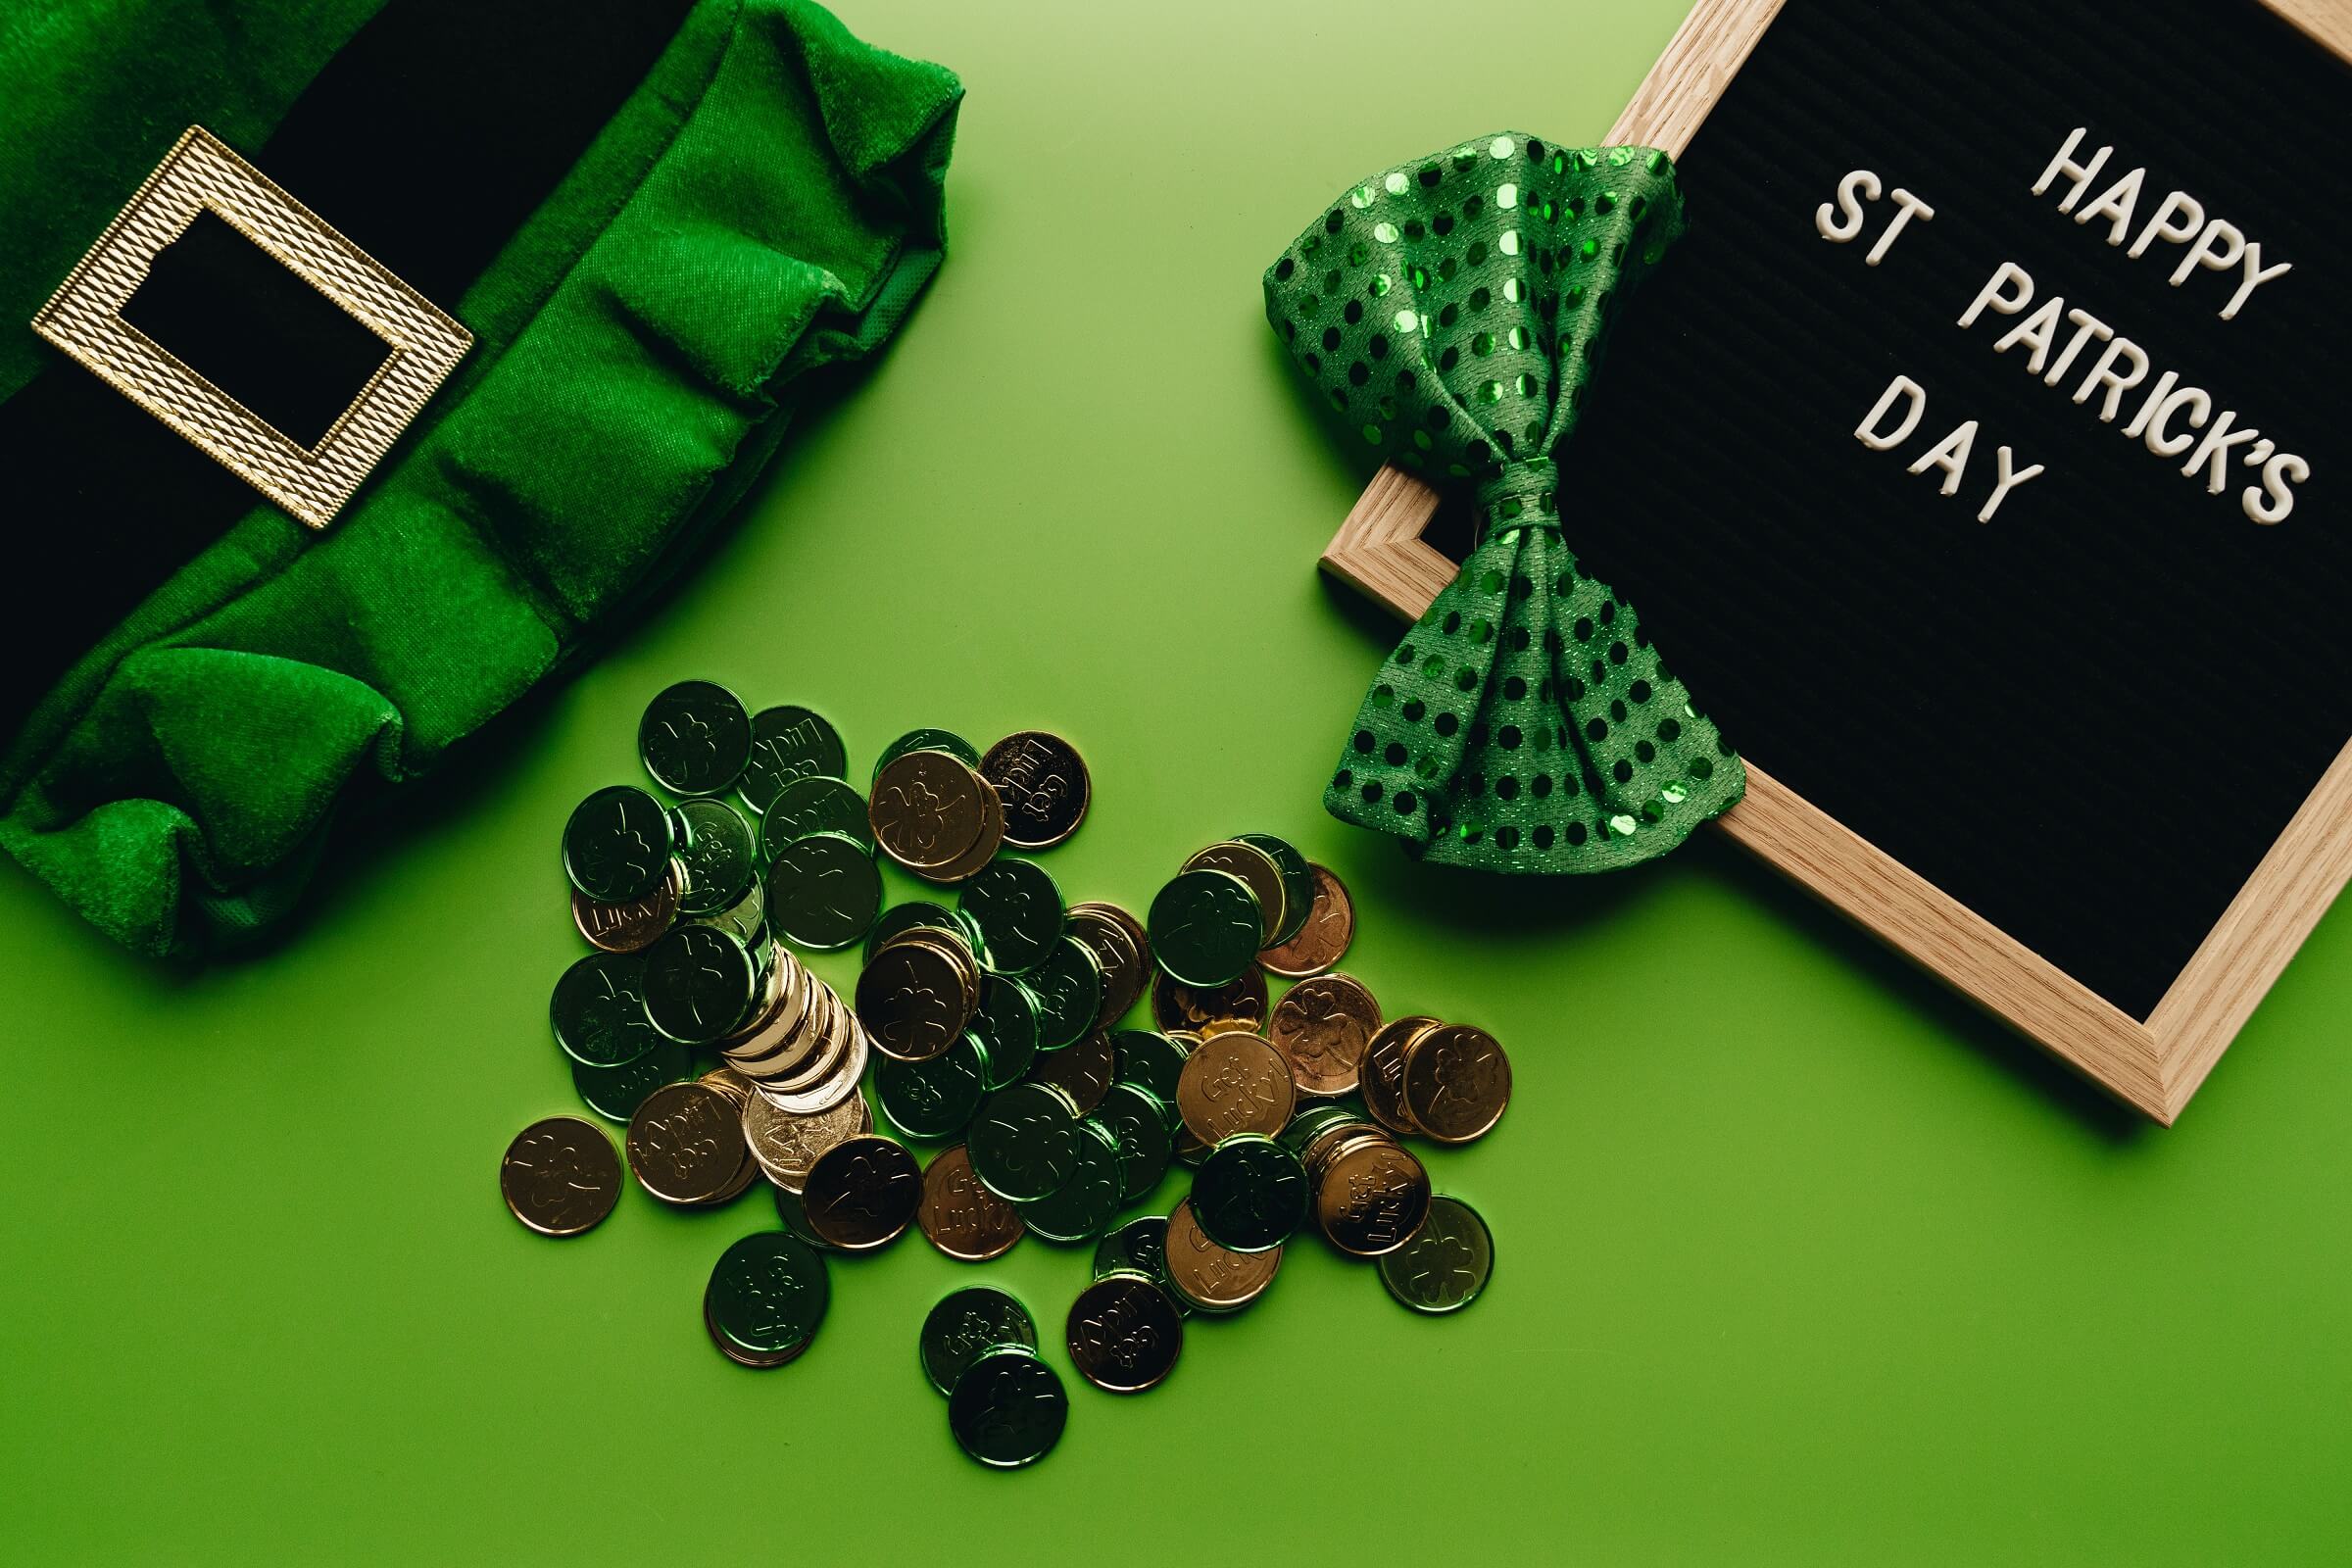 A pile of coins, a leprechaun hat, a green shiny bow and a memo board that says "Happy St. Patrick's Day" lay on a green backdrop.